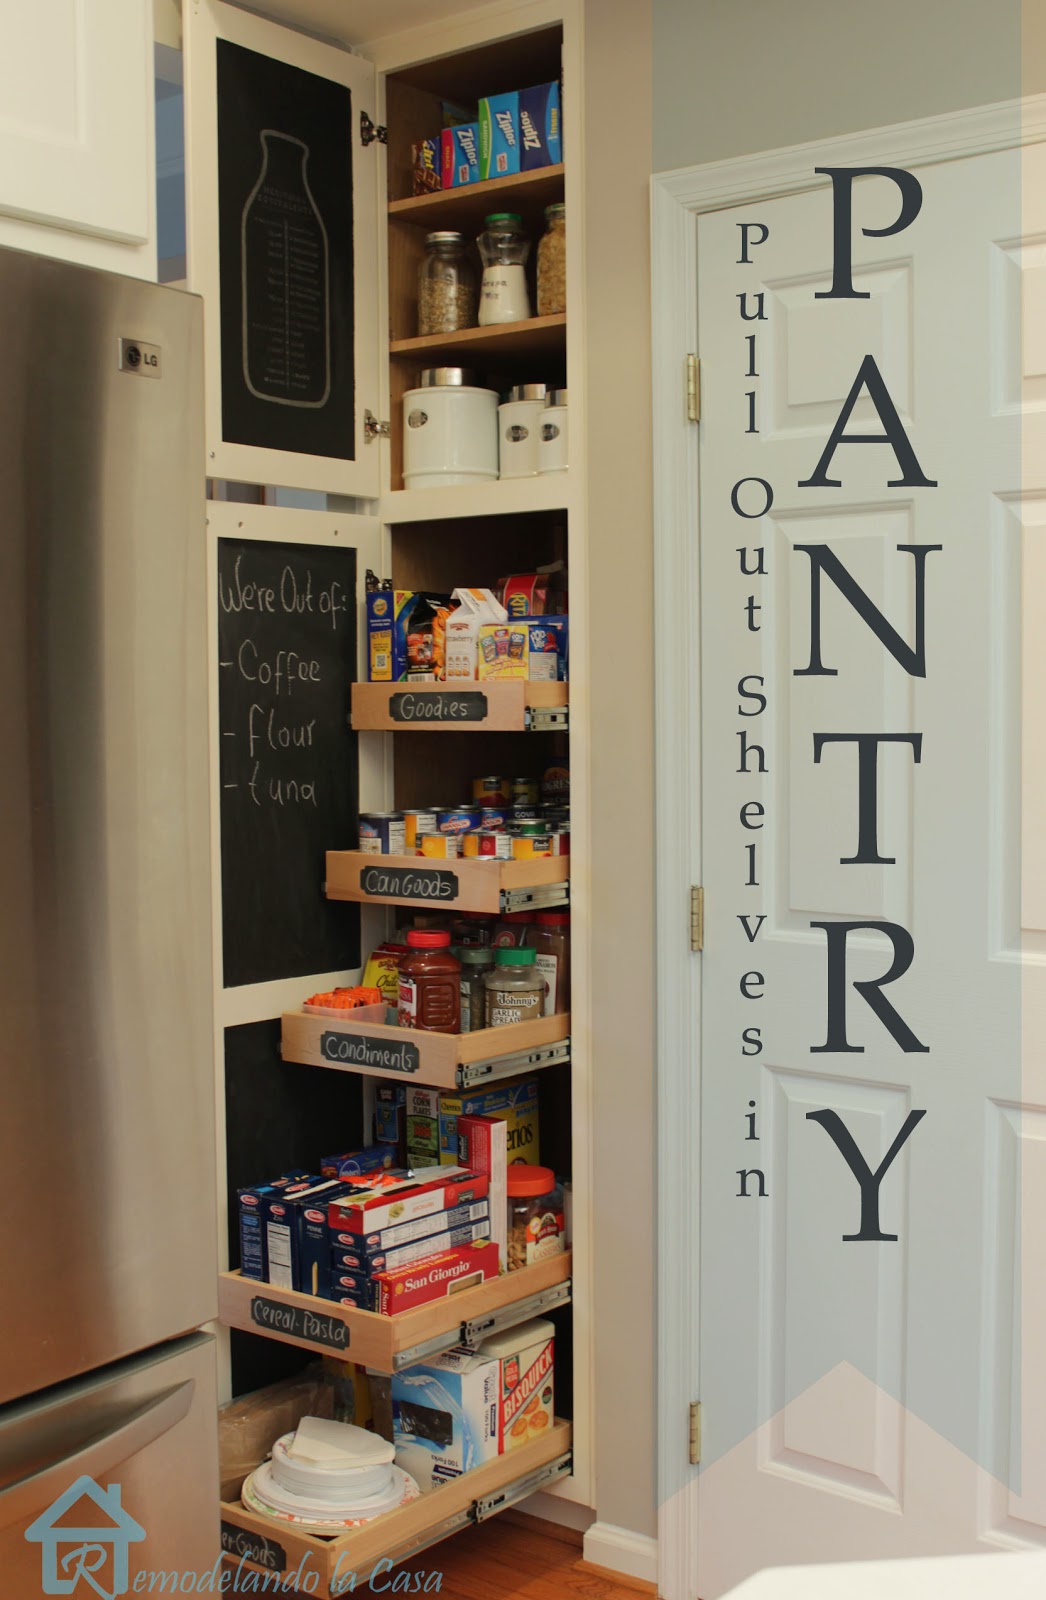 An organized pantry cabinet with pull out shelves.